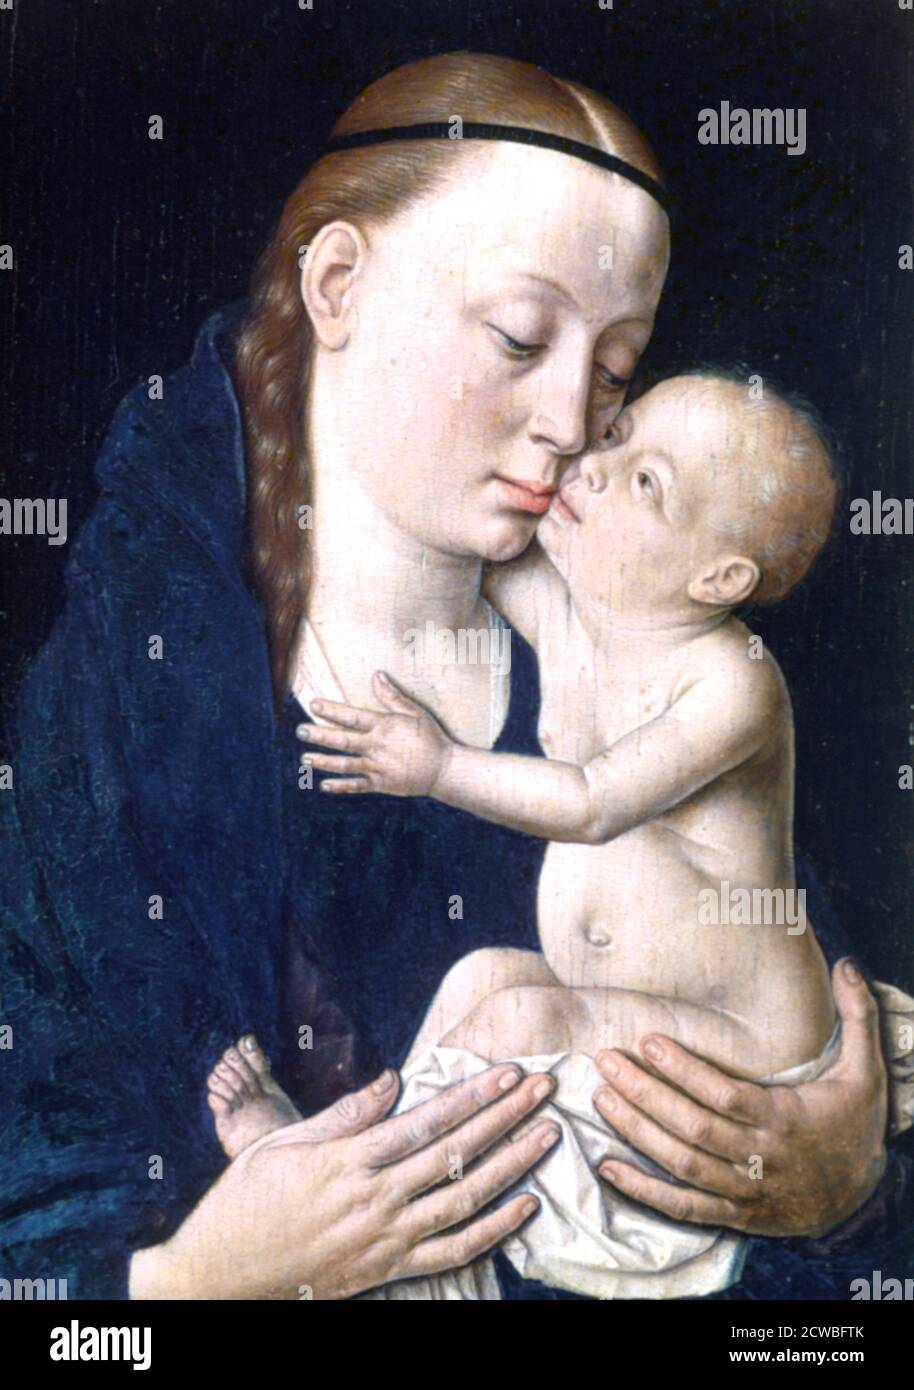 Virgin and Child', 15th Century. Creator: Dieric Bouts. Dieric Bouts (1415-1475) was an Early Netherlandish painter. Bouts may have studied under Rogier van der Weyden. Stock Photo